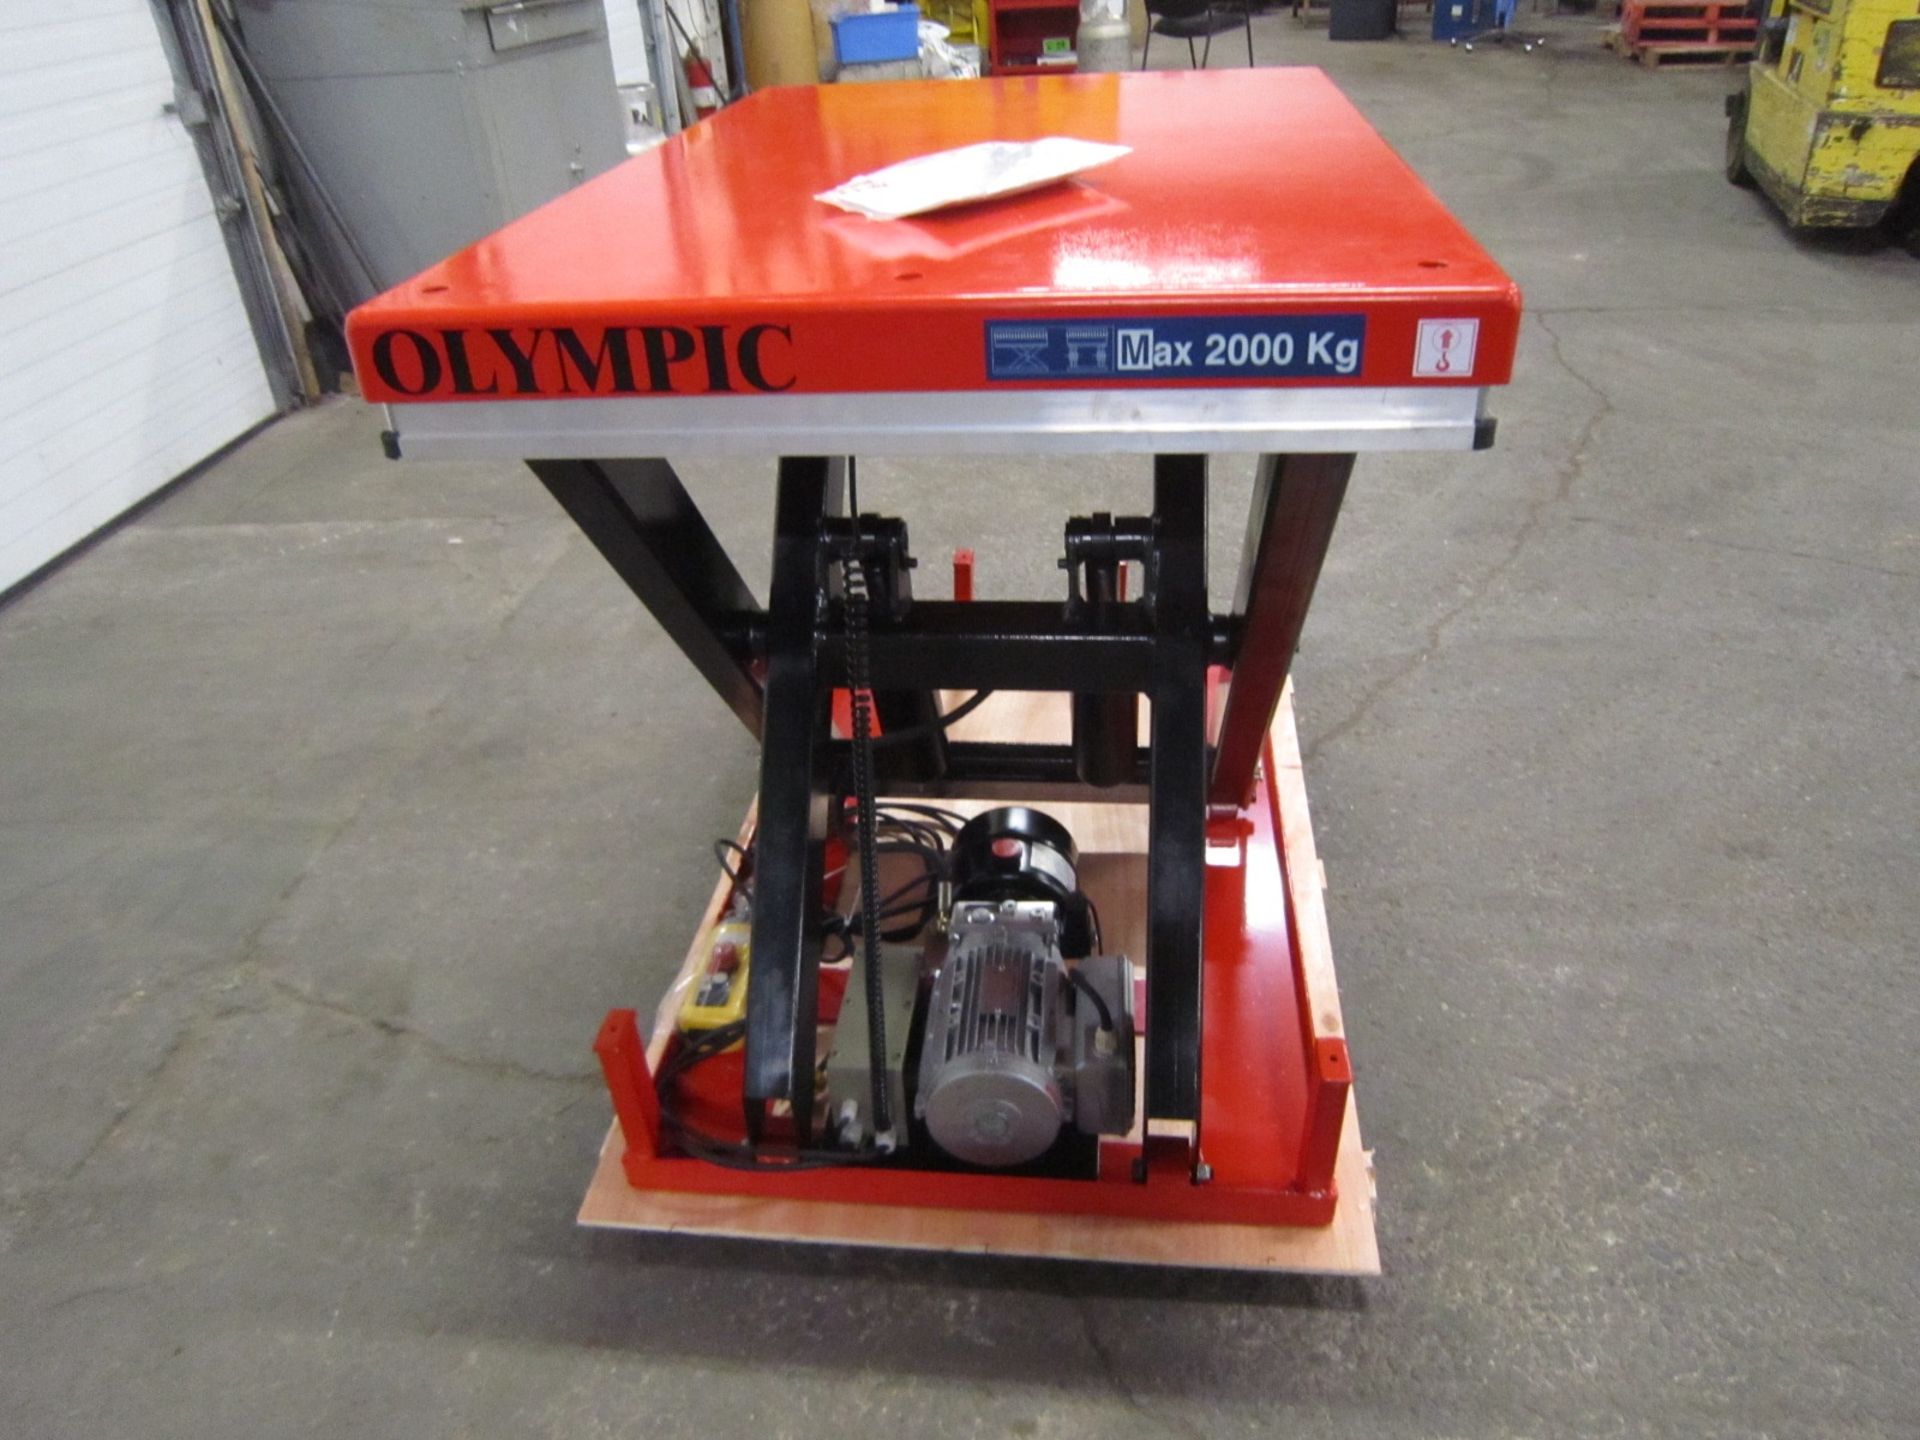 Olympic Hydraulic Lift Table 32"" x 52"" x 40"" lift - 4000lbs capacity - UNUSED and MINT - 115V - Image 2 of 2